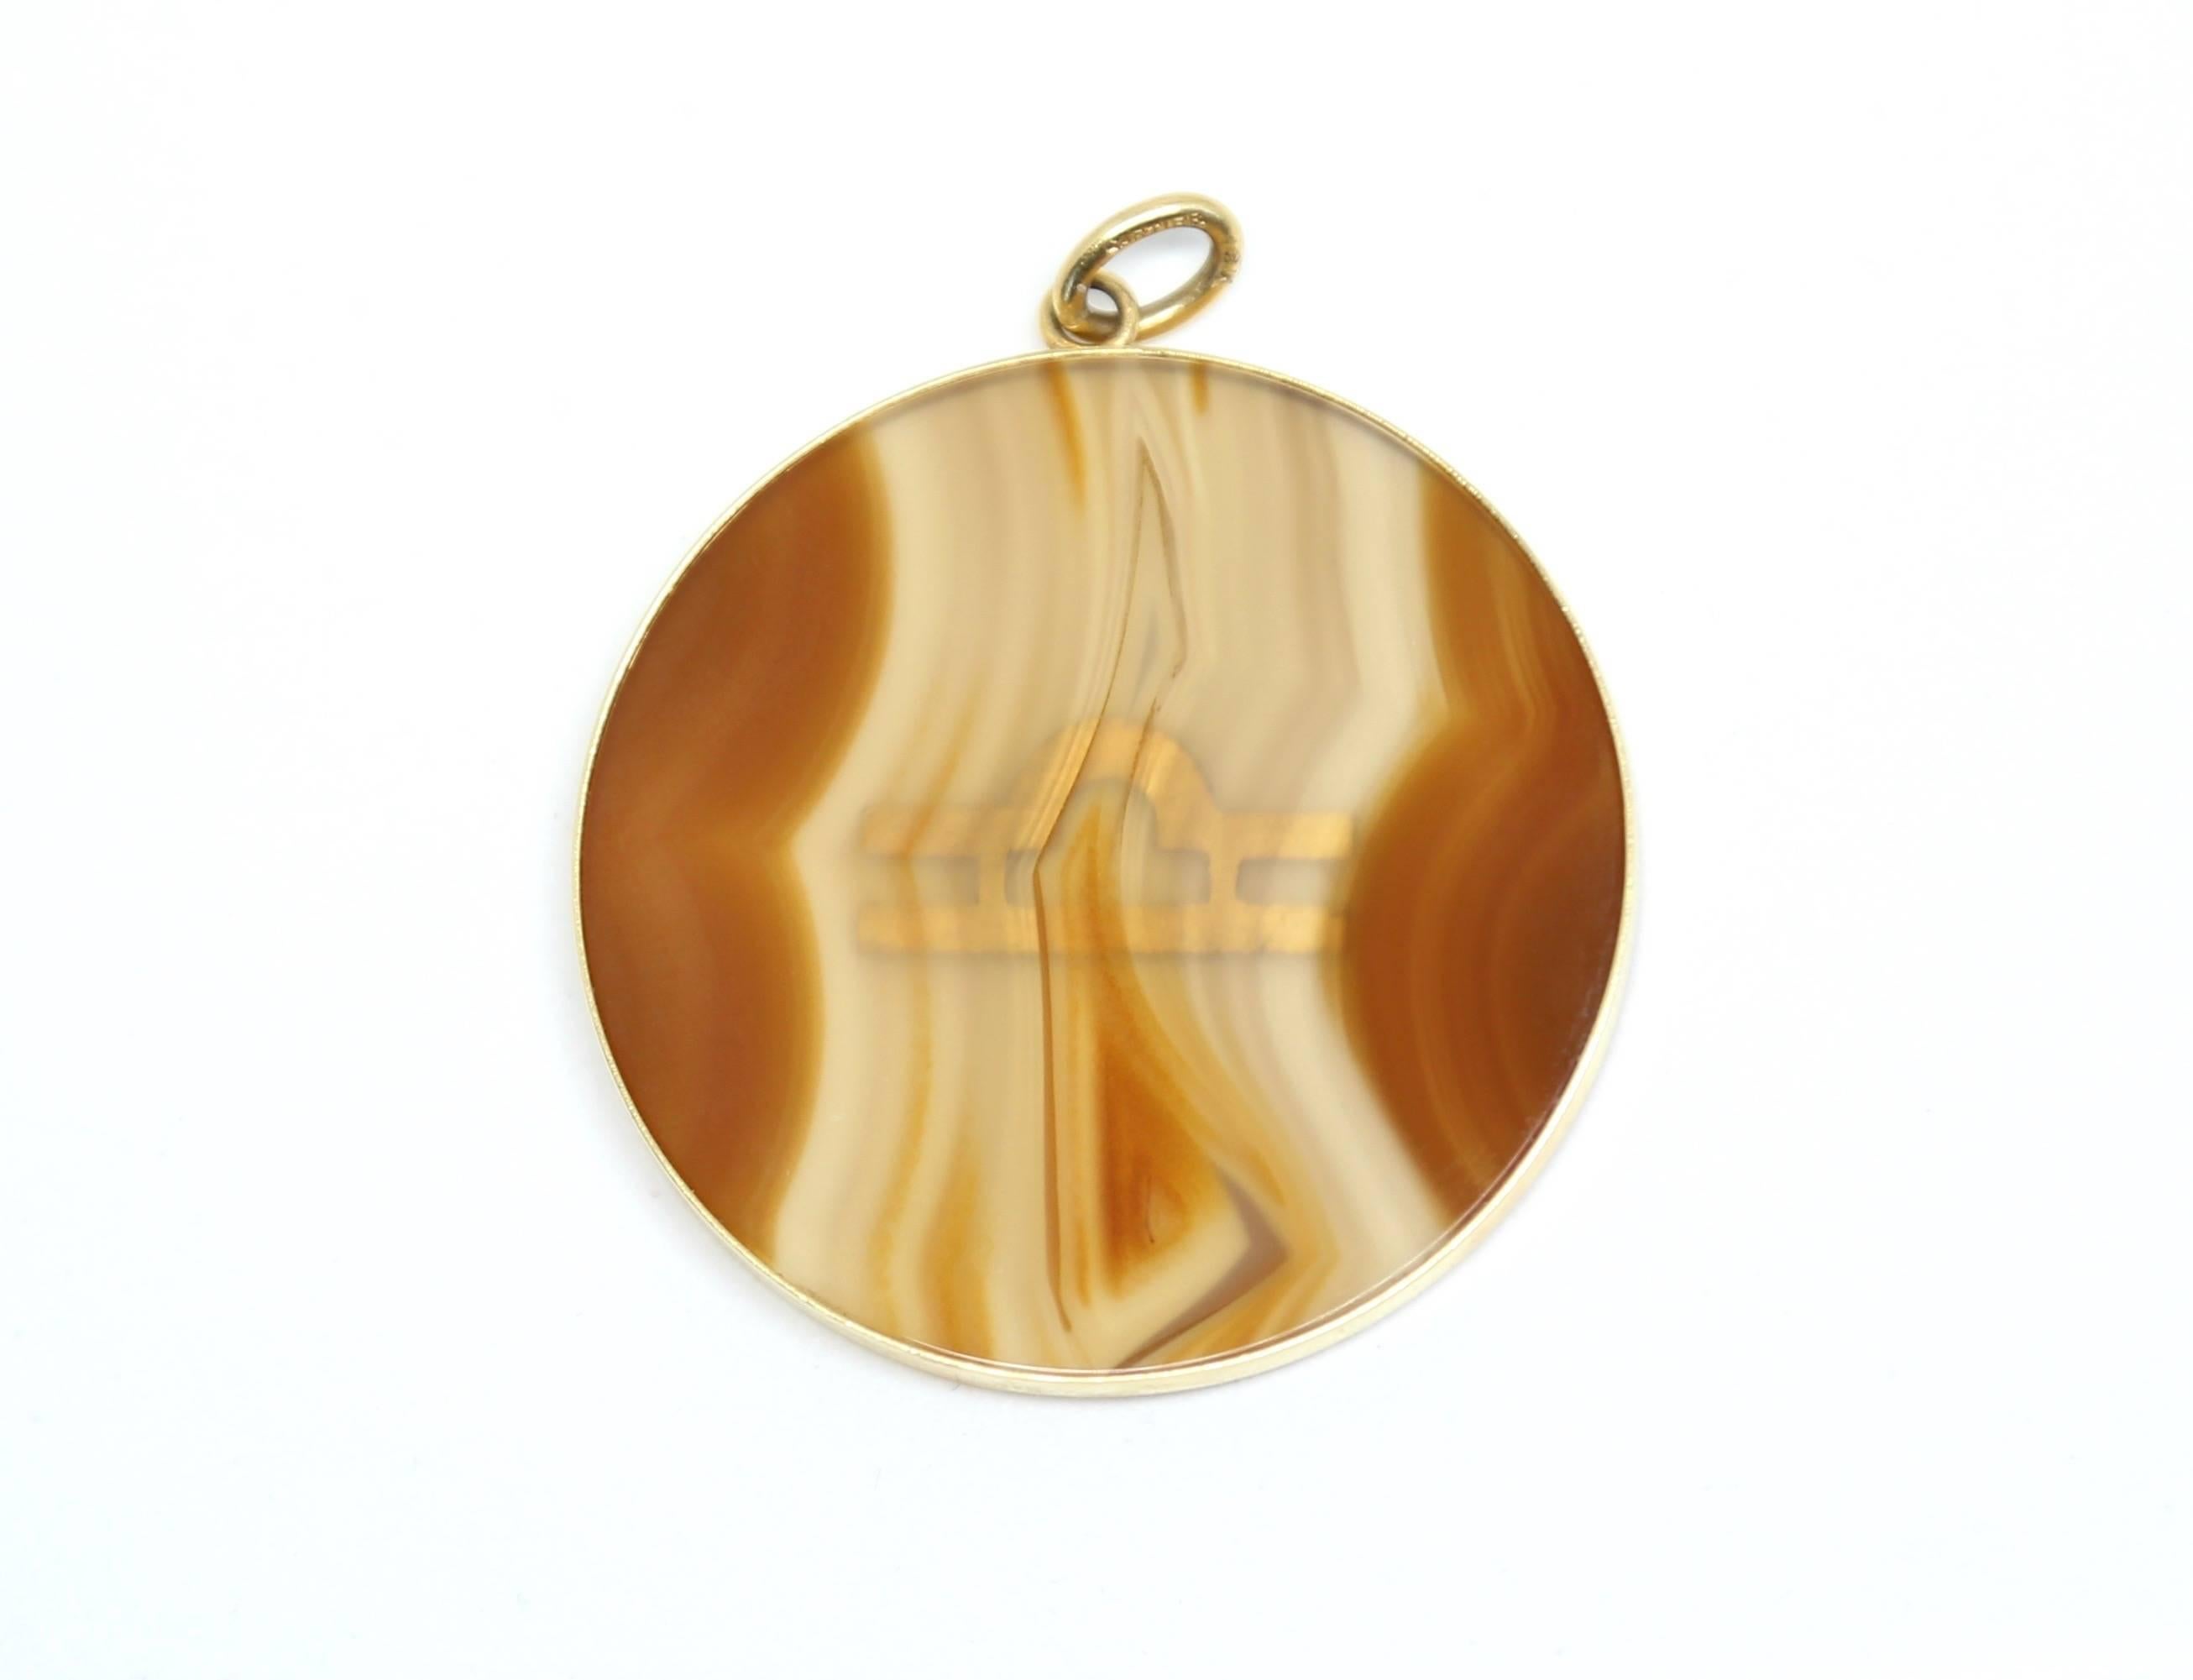 Unusual agate and 18k gold 'Libra' astrological pendant designed by Cartier dating to the 1970's. Pendant measures approximately 5 cm with bail. Agate measures approximately 4.1275 cm. Thickness is approximately 0.3175 cm. Marked 'Cartier' and